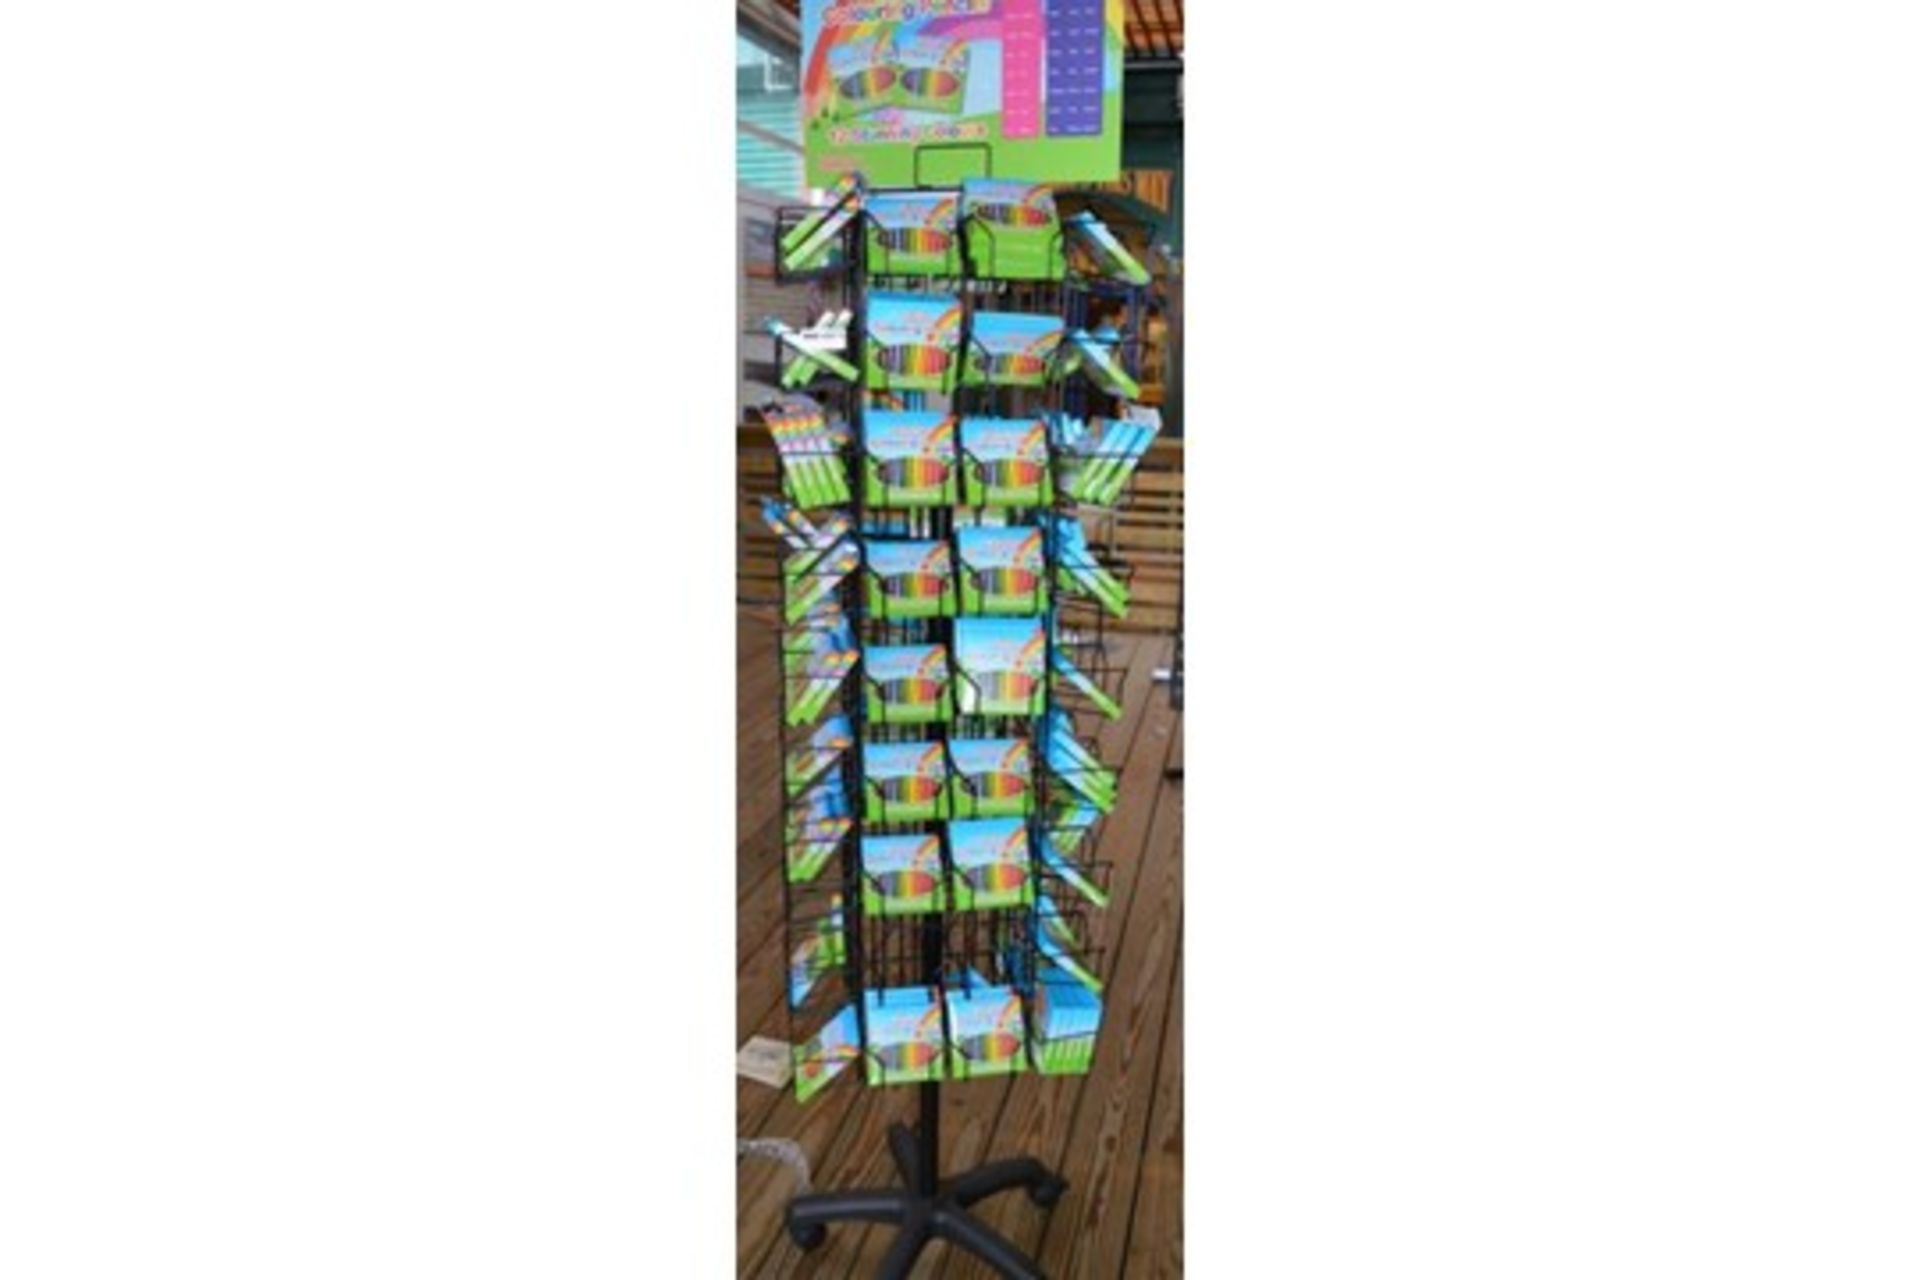 27 x Retail Carousel Display Stands With Approximately 2,800 Items of Resale Stock - Includes - Image 27 of 61